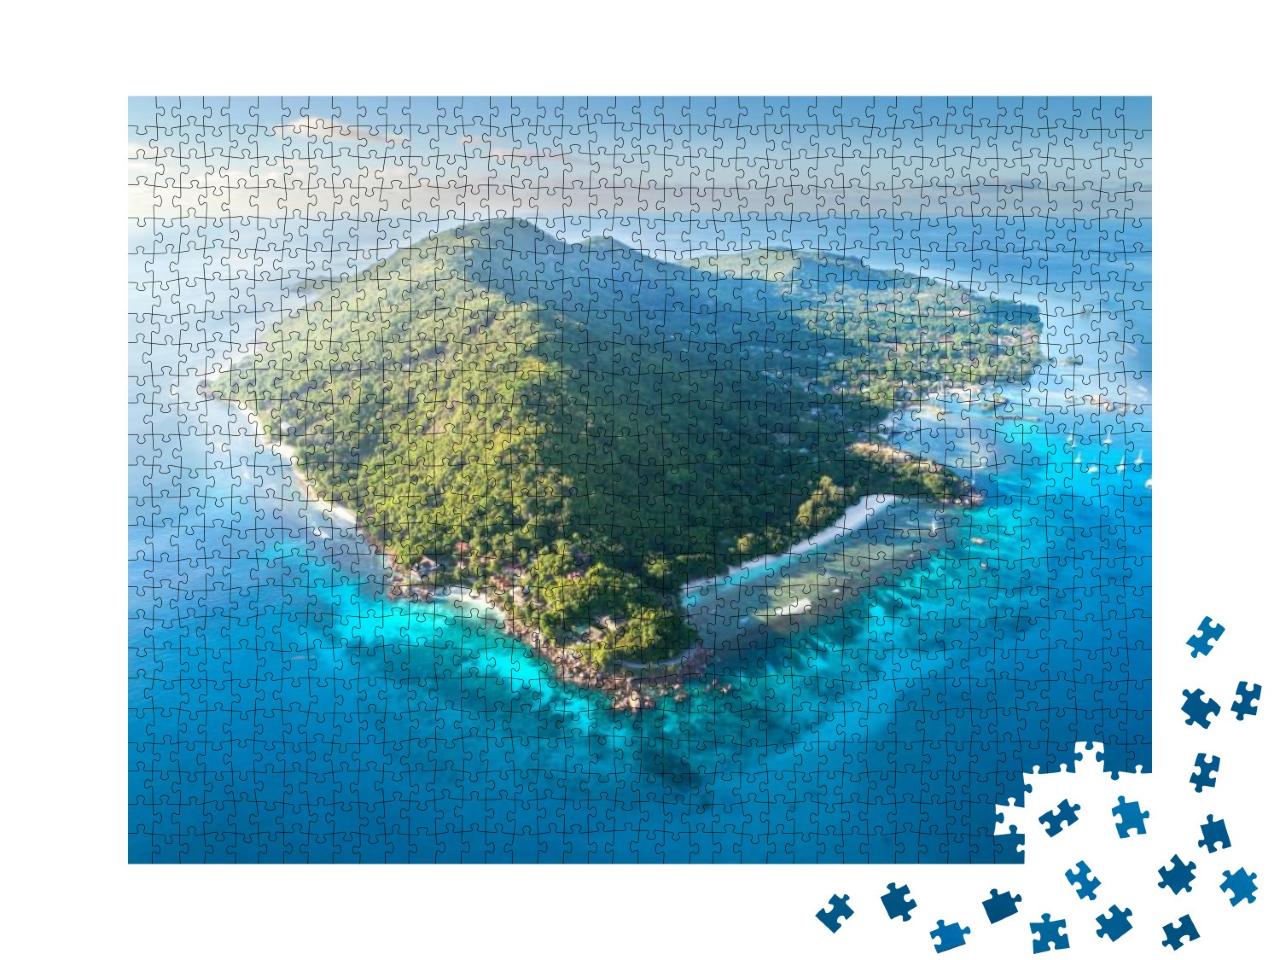 Seychelles, La Digue Island, Aerial Drone Photo... Jigsaw Puzzle with 1000 pieces